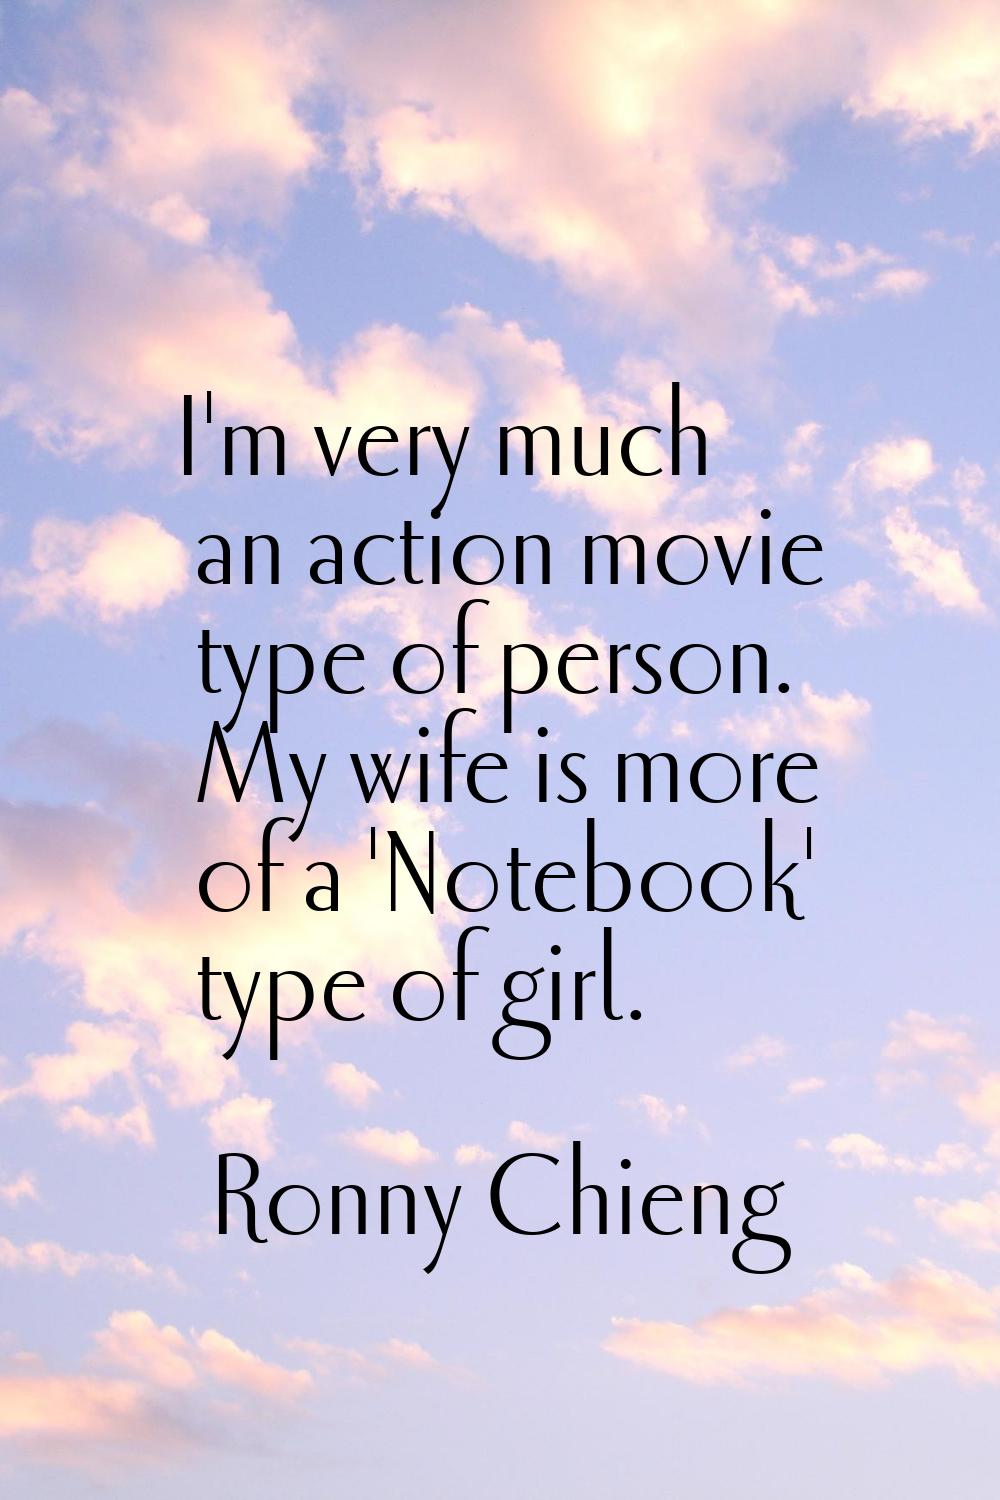 I'm very much an action movie type of person. My wife is more of a 'Notebook' type of girl.